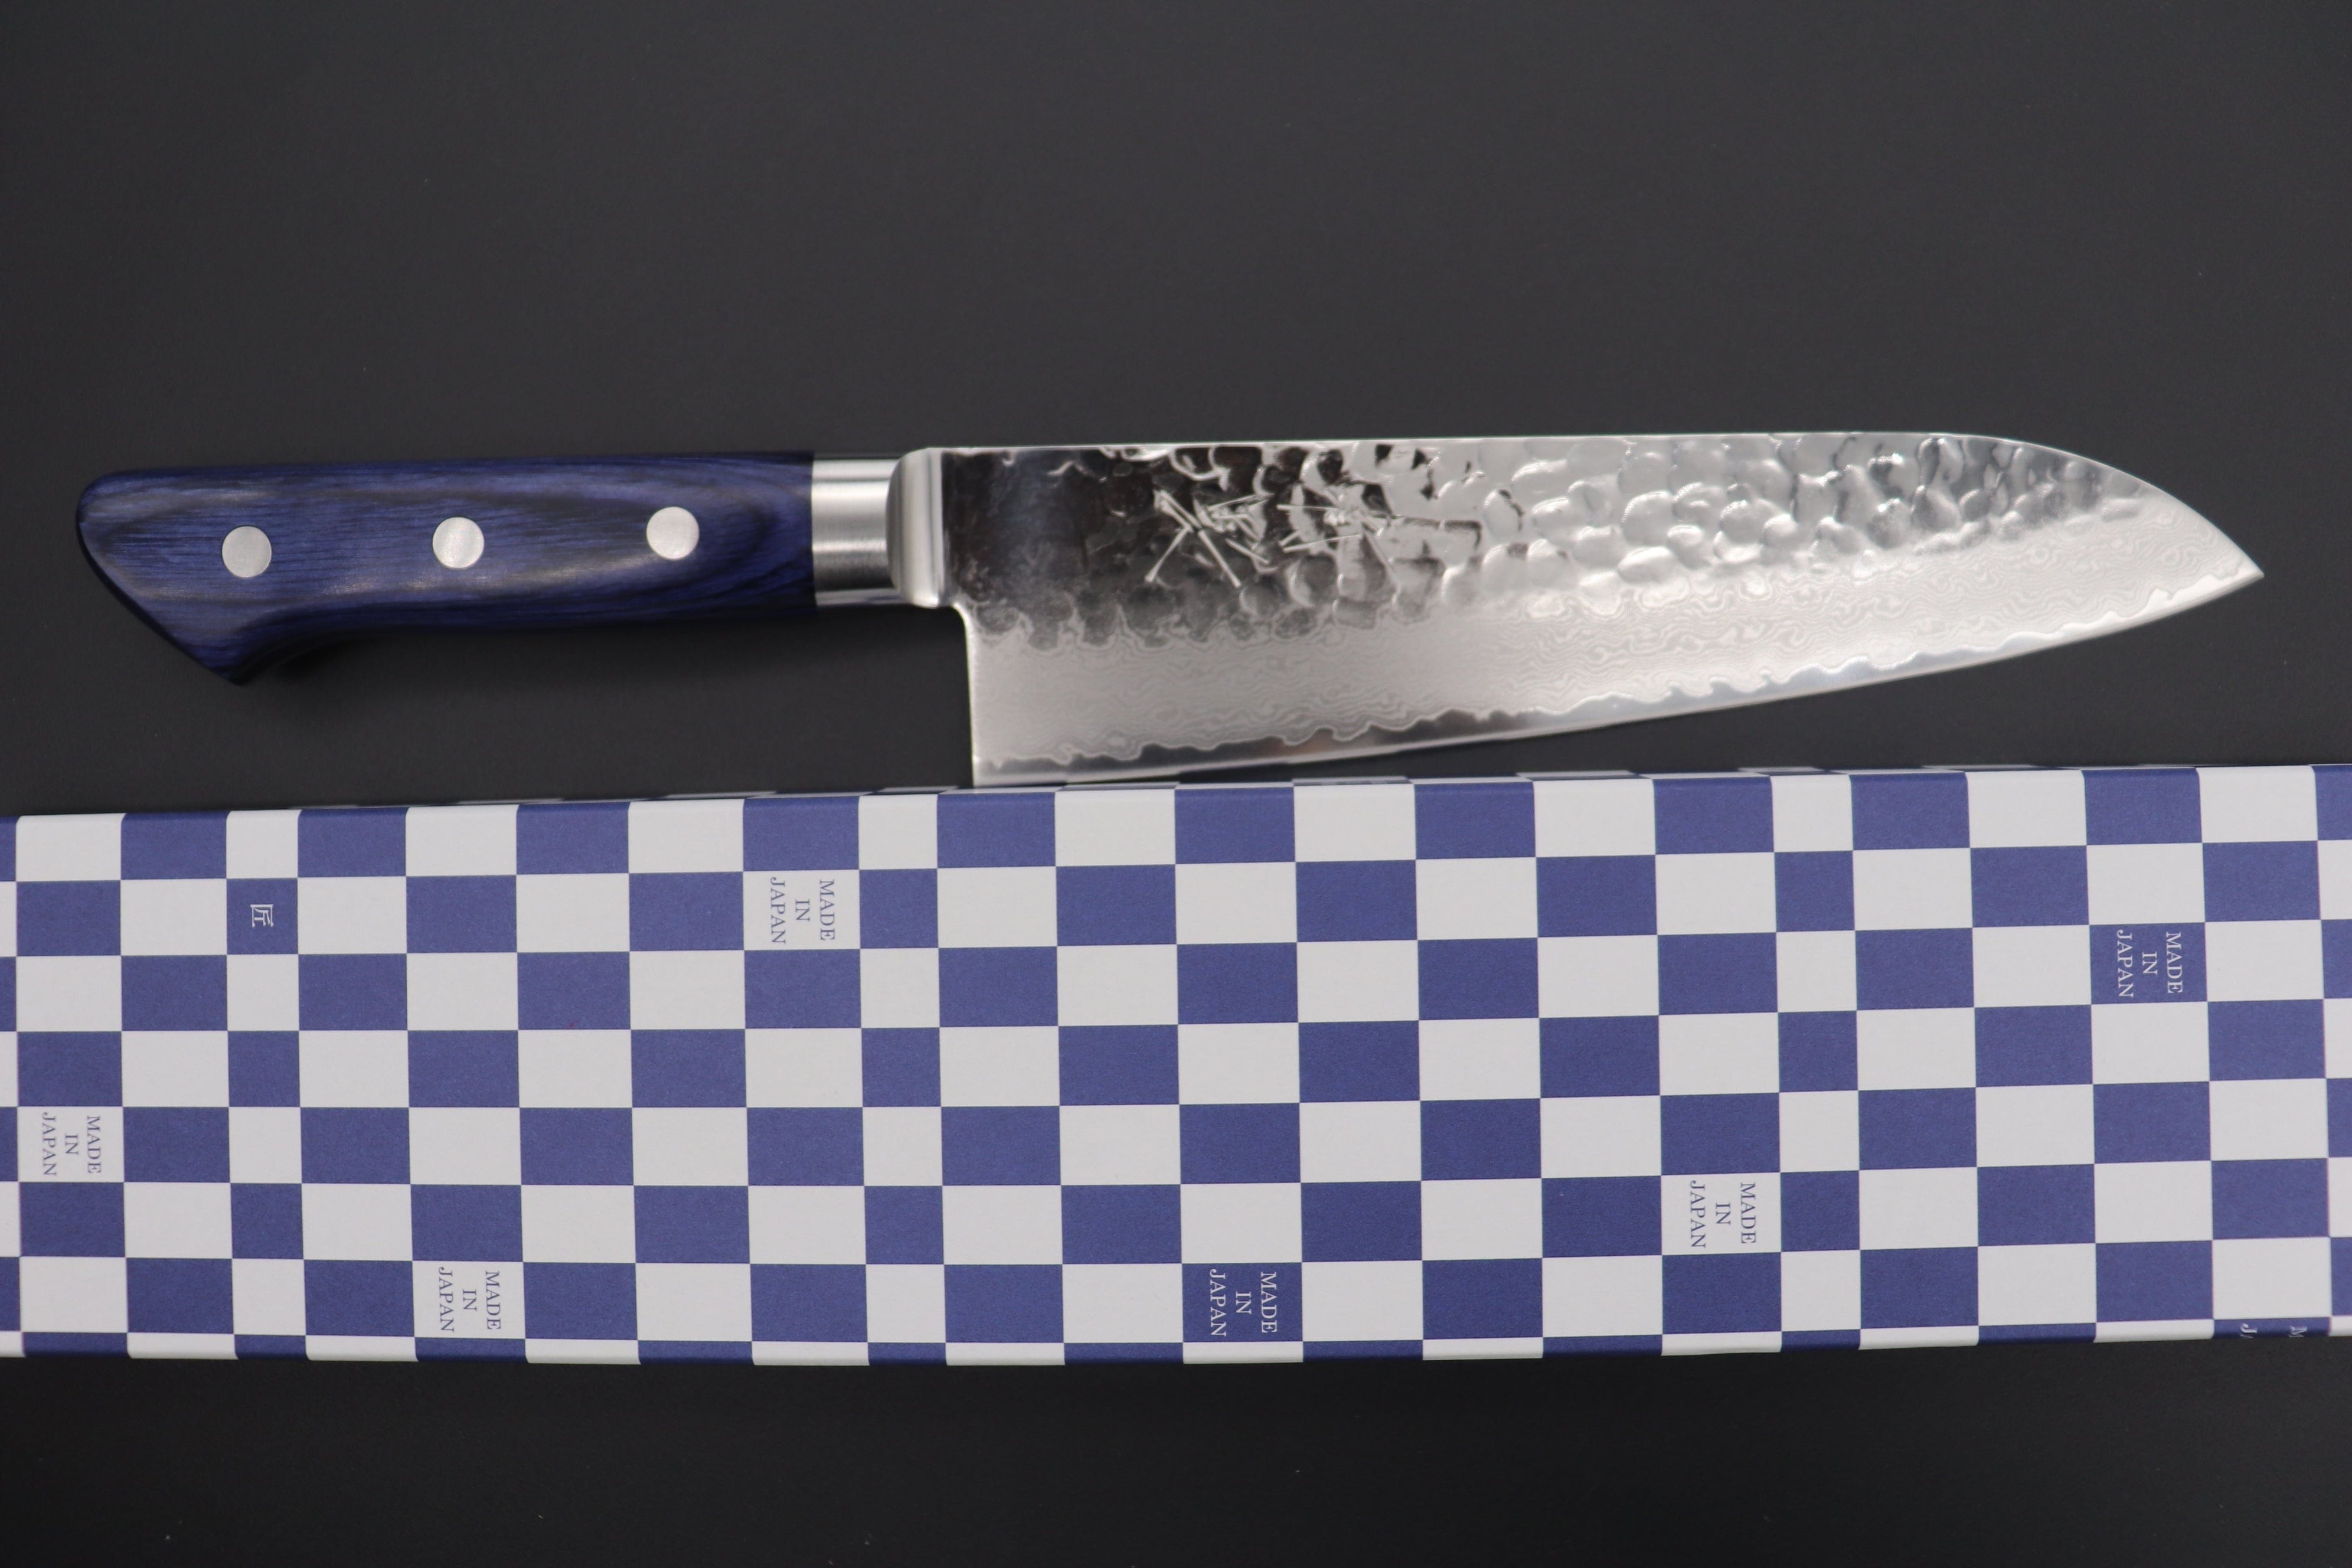 Damascus Steel Knives with Blue Resin Handle – Vertoku